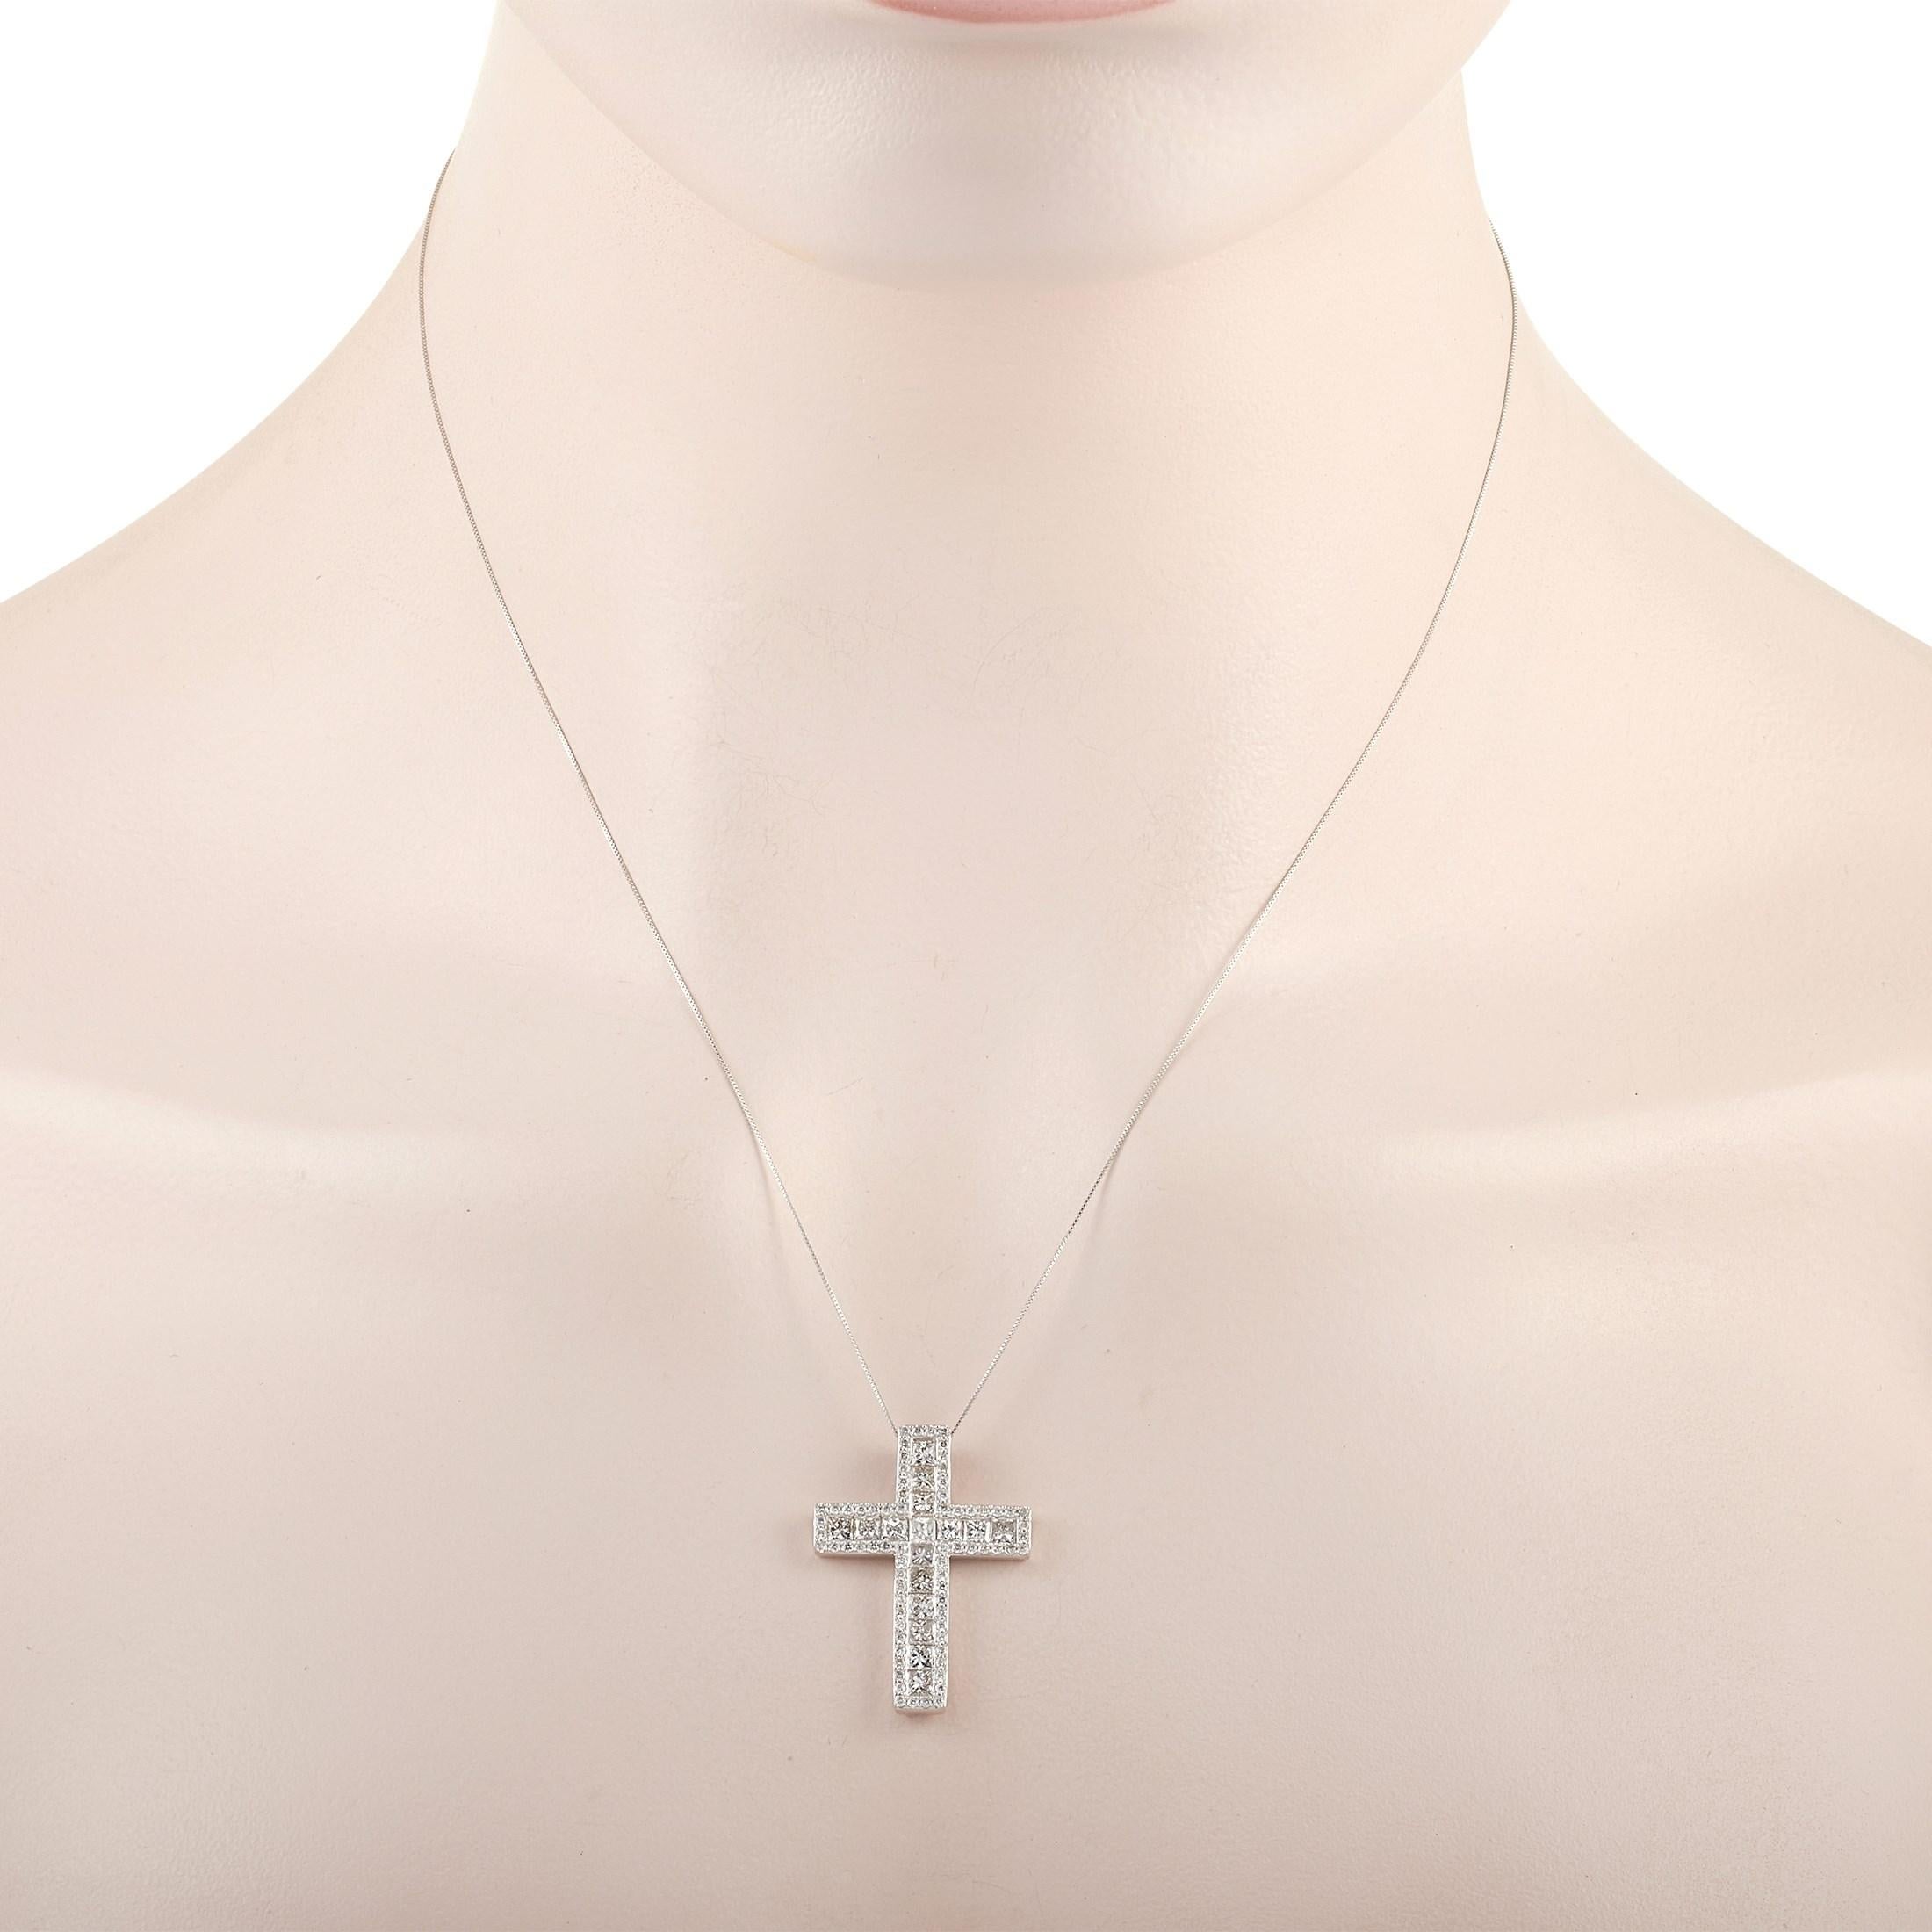 The LB Exclusive 14K White Gold 2.23 ct Diamond Cross Necklace features a delicate 14K White Gold chain that is 17 inches in length and features a matching 14K white gold cross pendant set with 2.23 carats of princess cut diamonds. The pendant